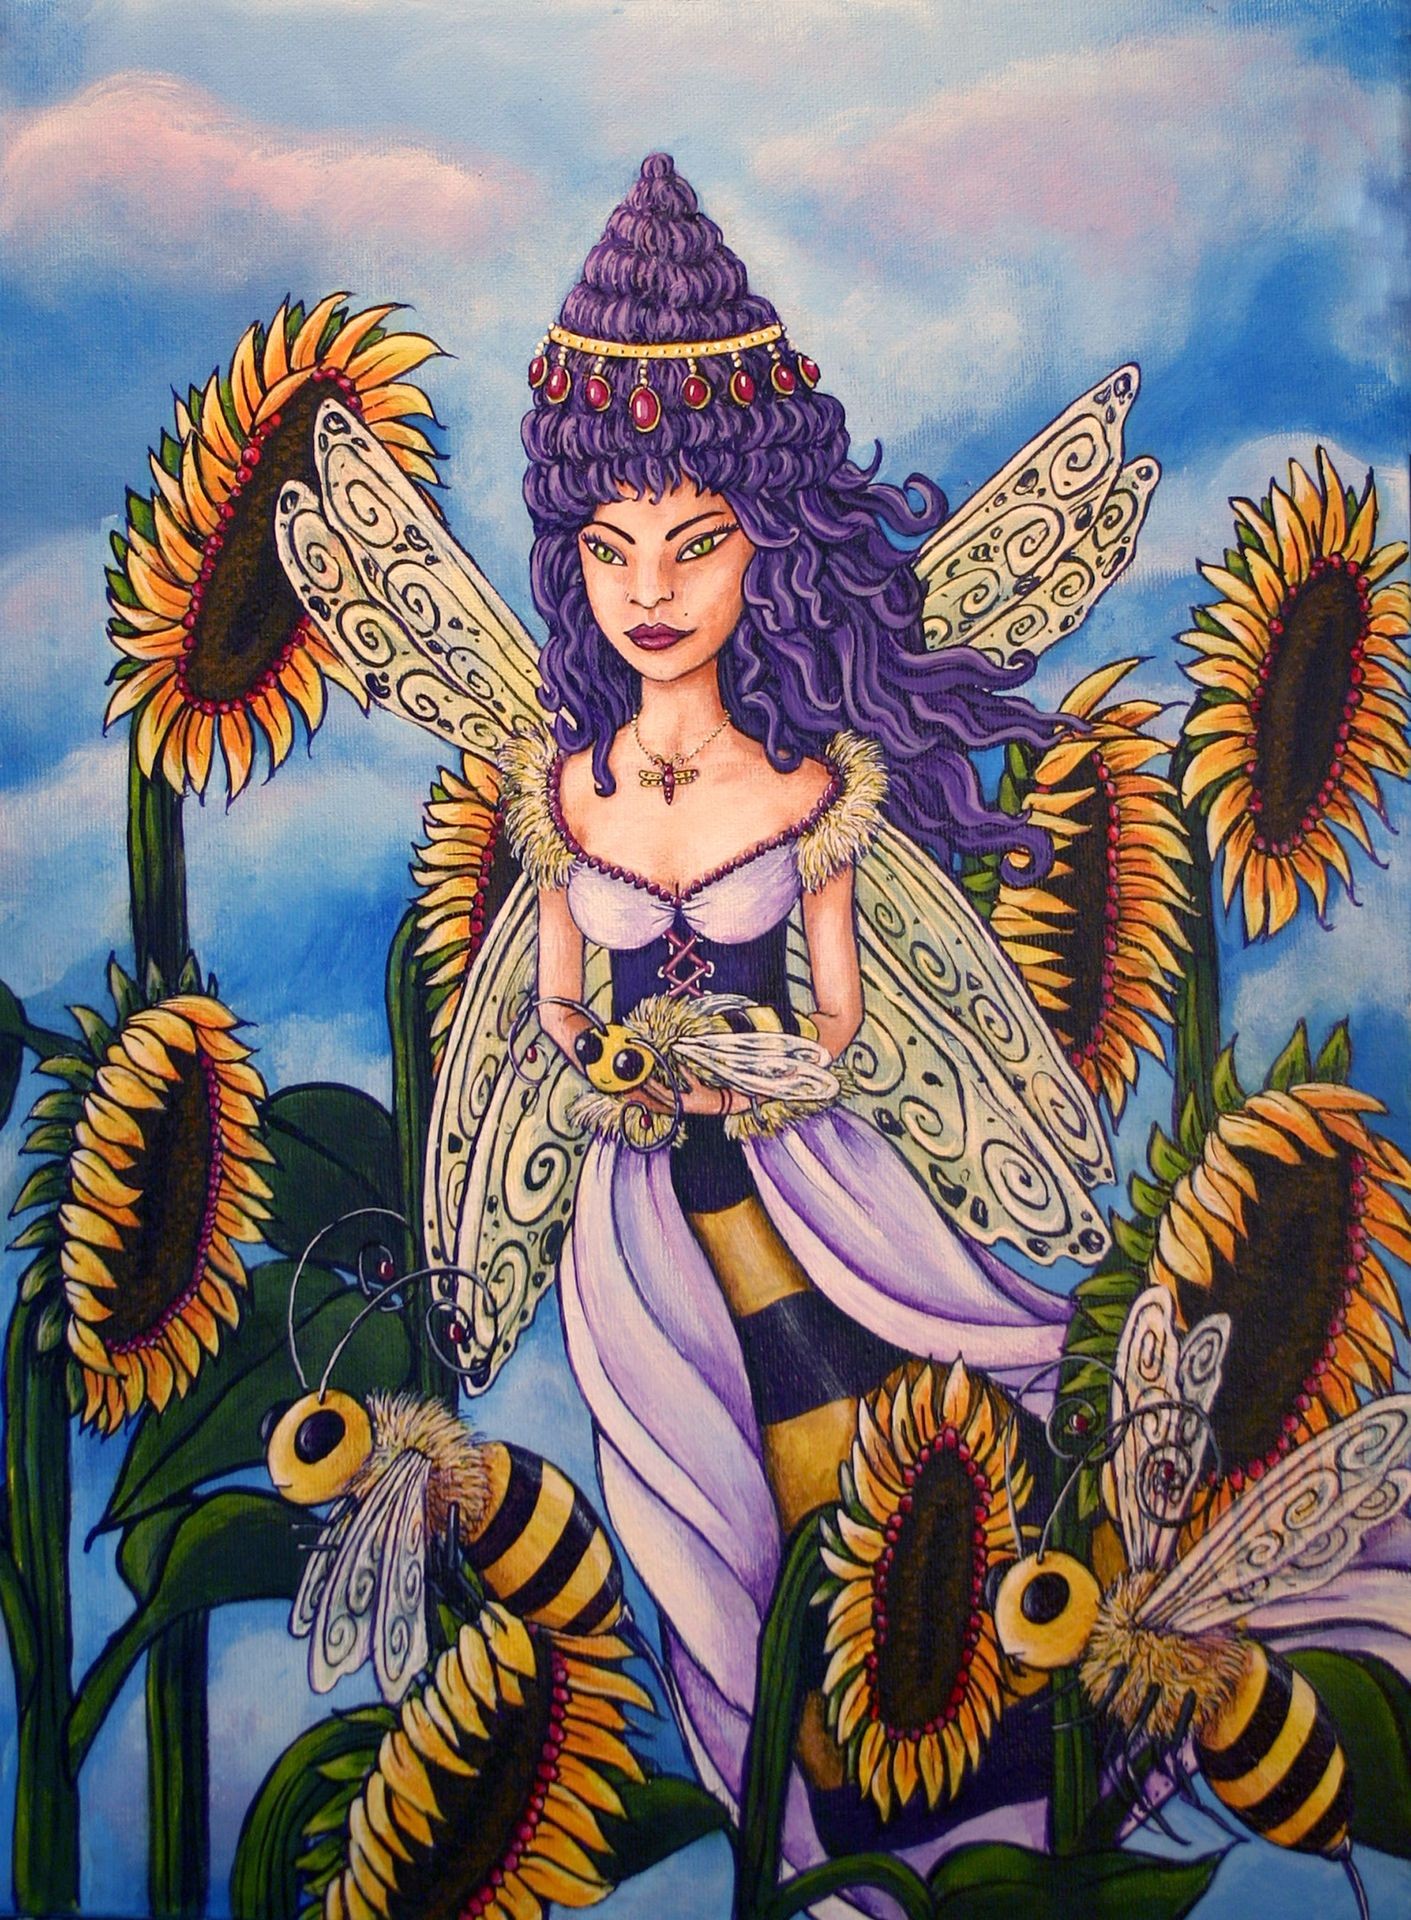 Queen bee with sunflowers wings flying